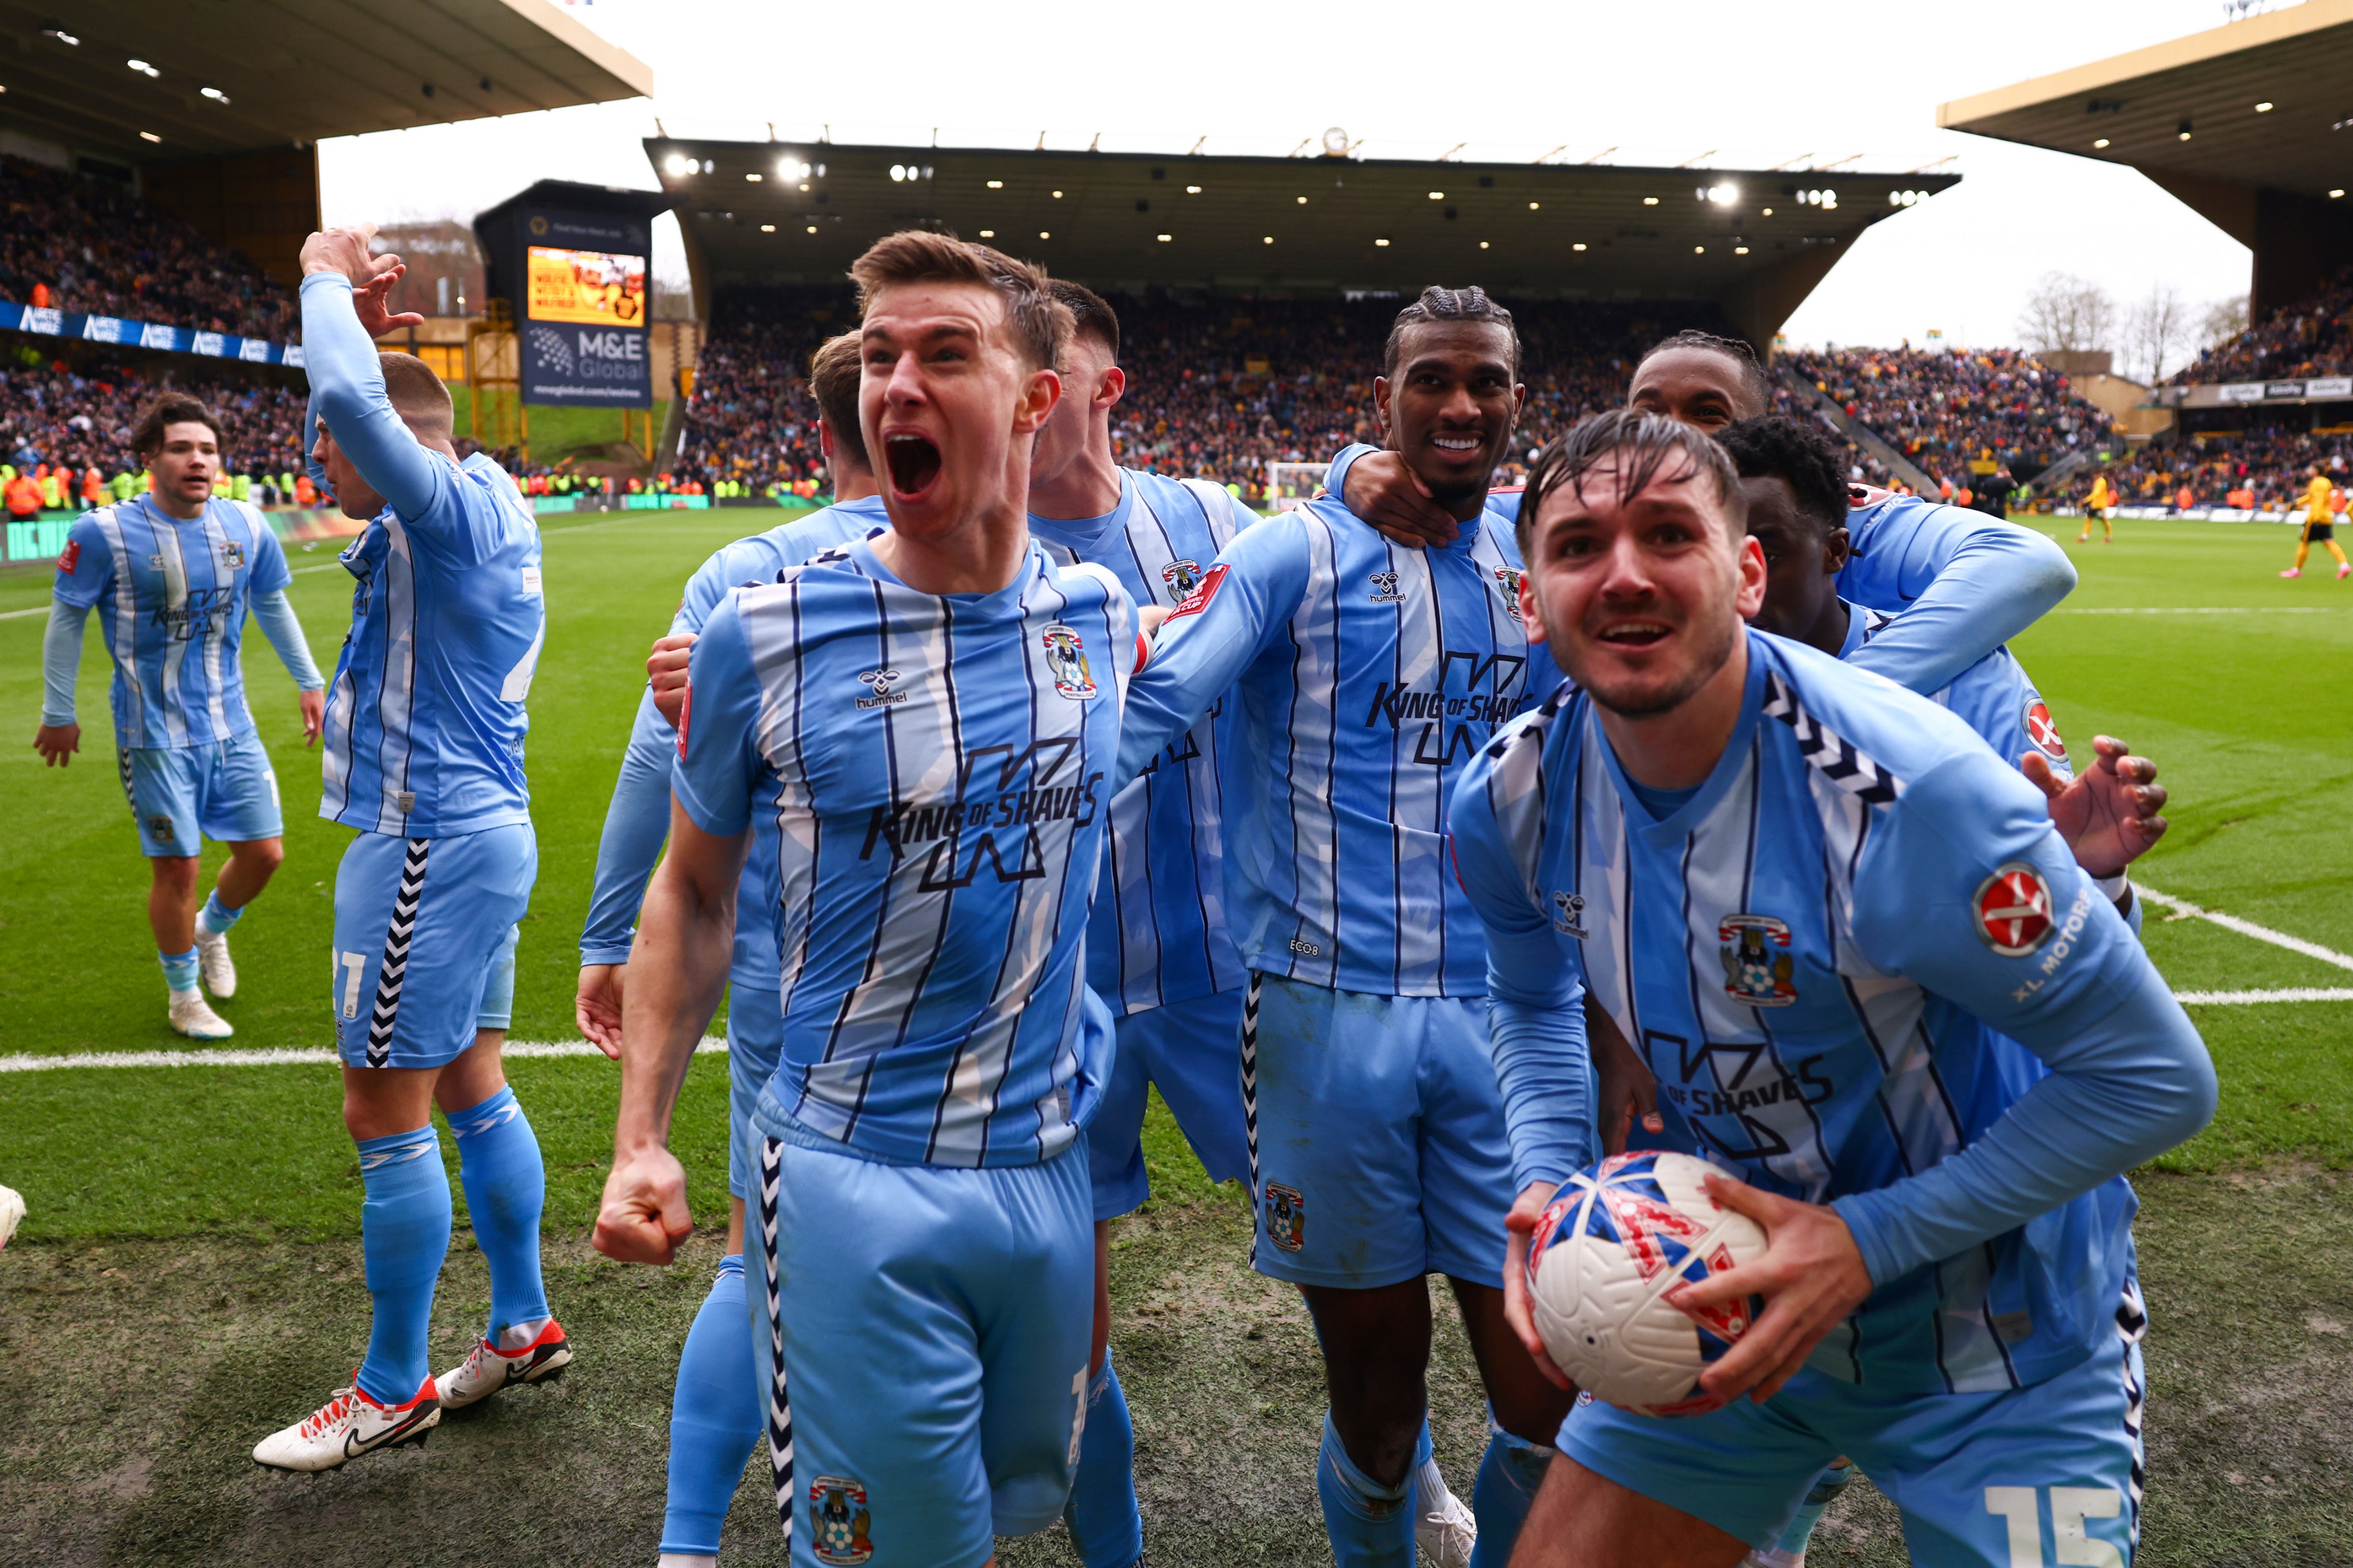 An image of Coventry City players celebrating